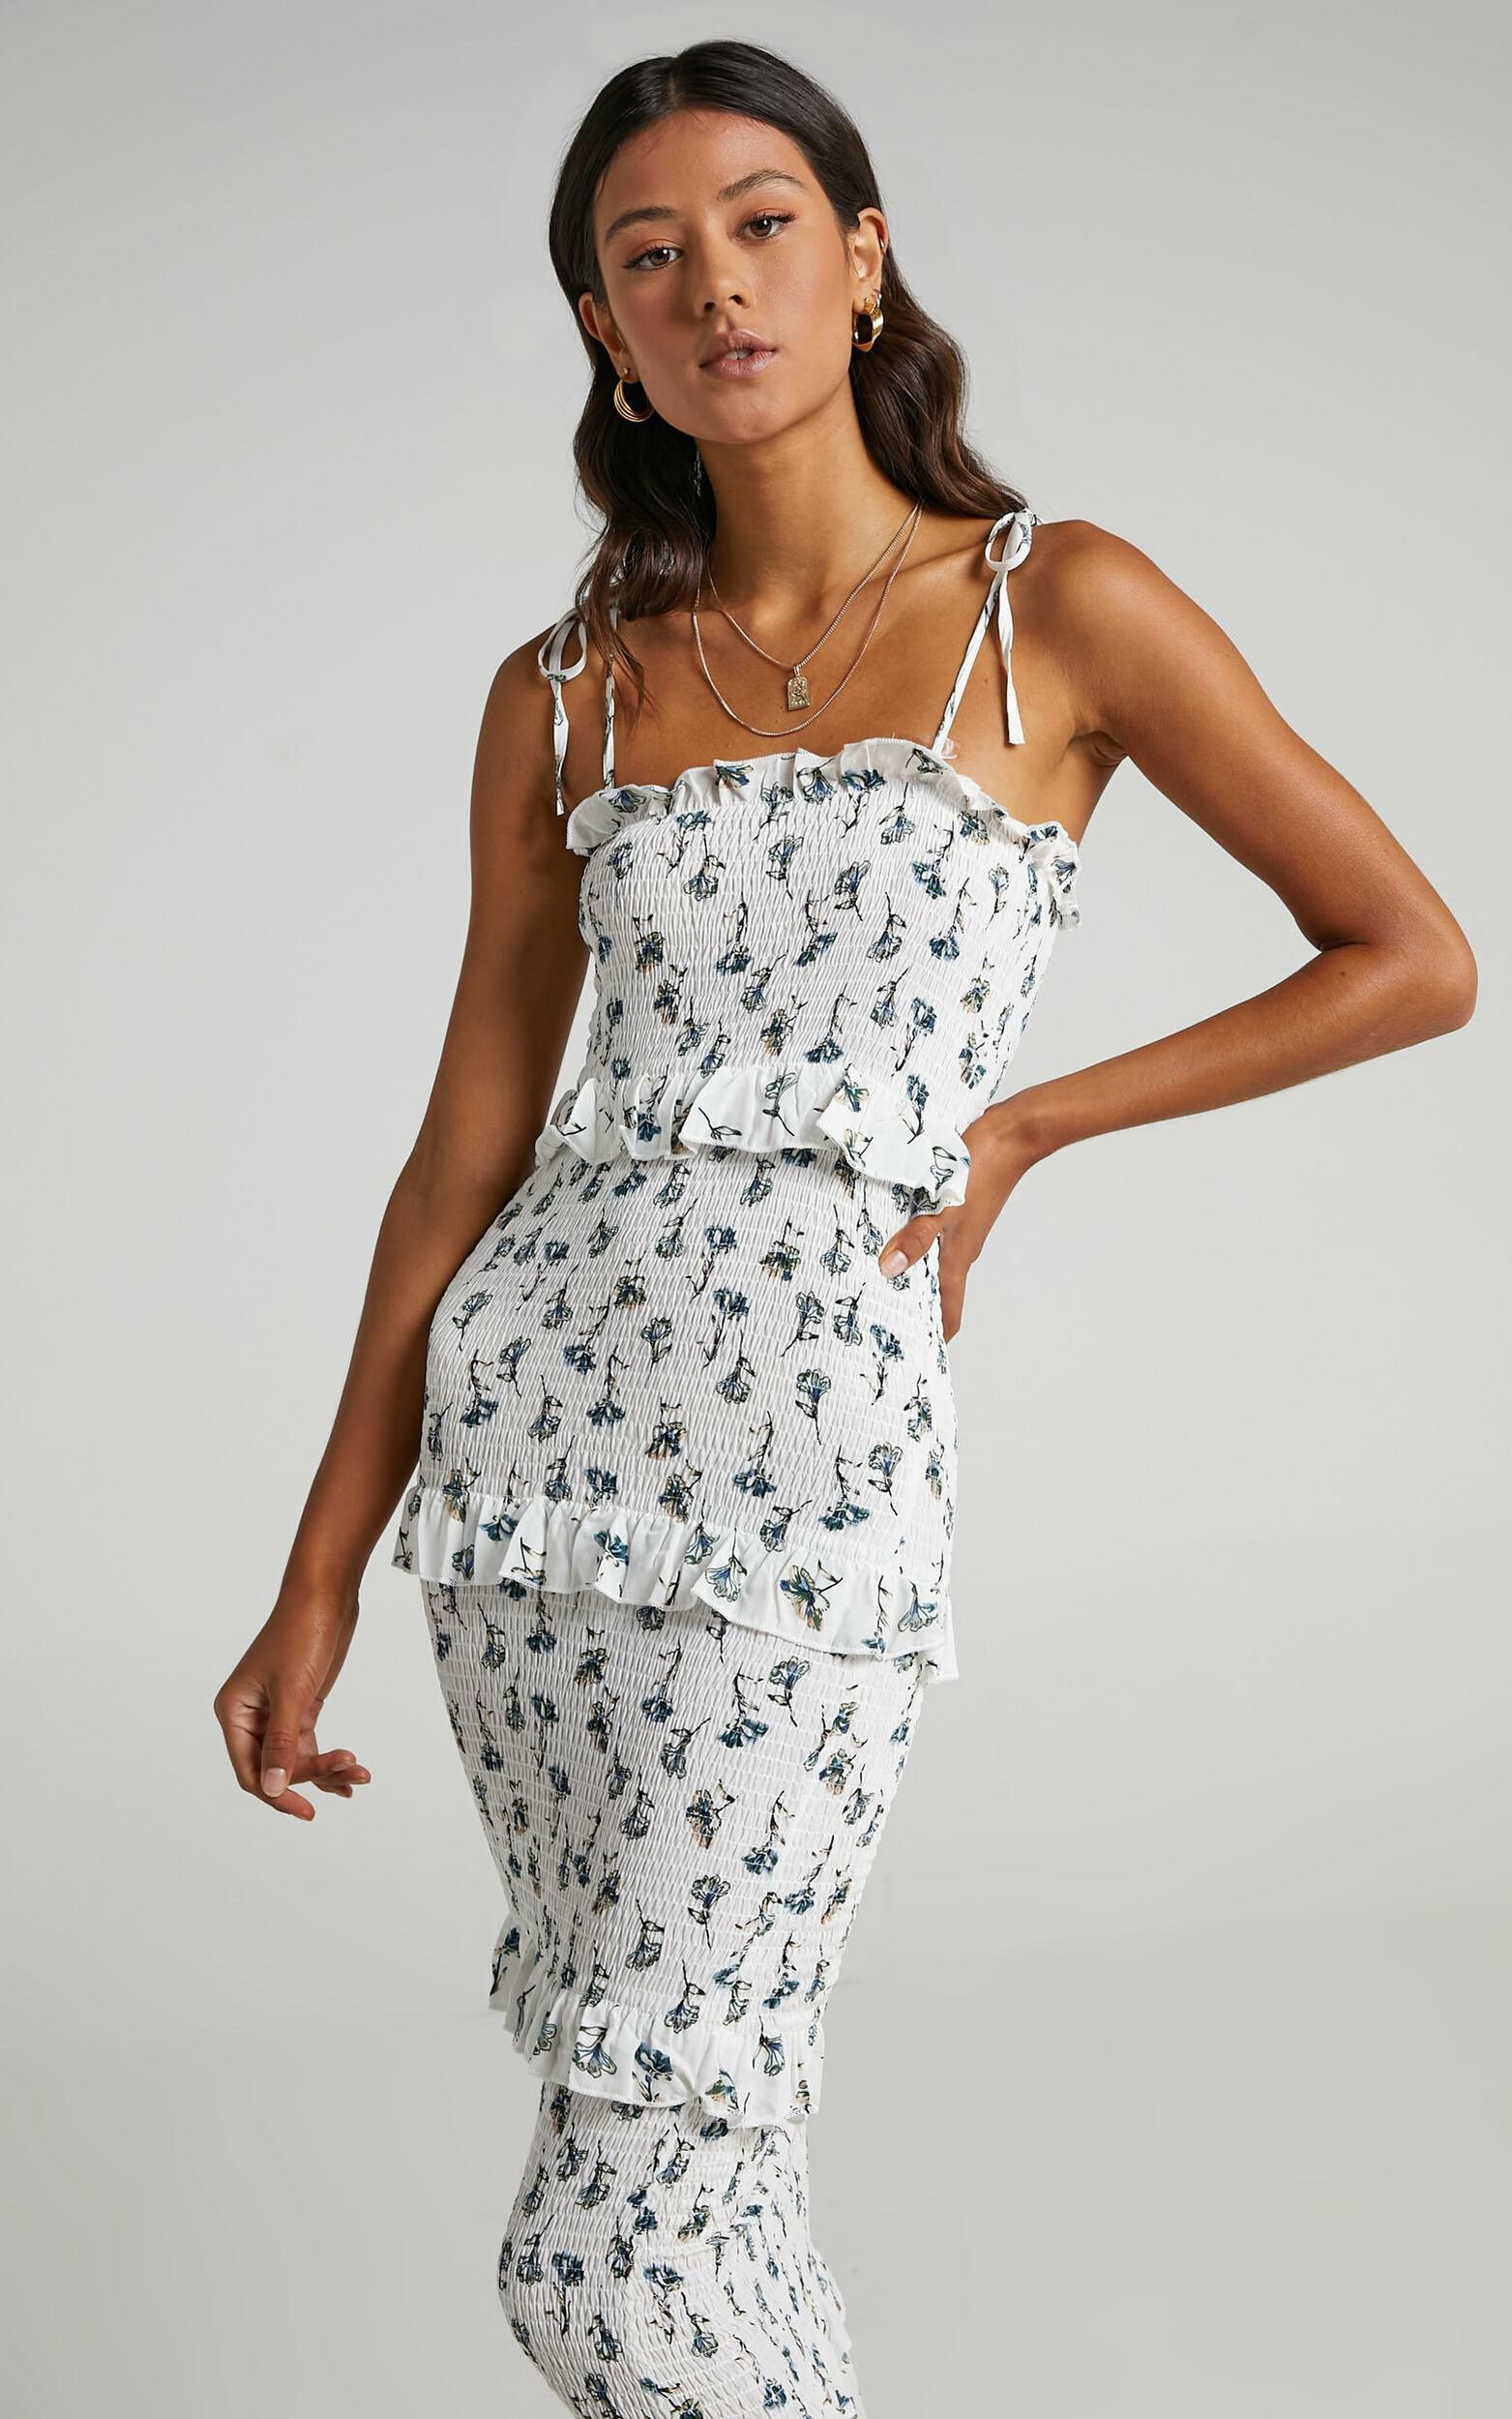 My Favourite Thing Shirred Midi Dress in White Floral | Showpo USA